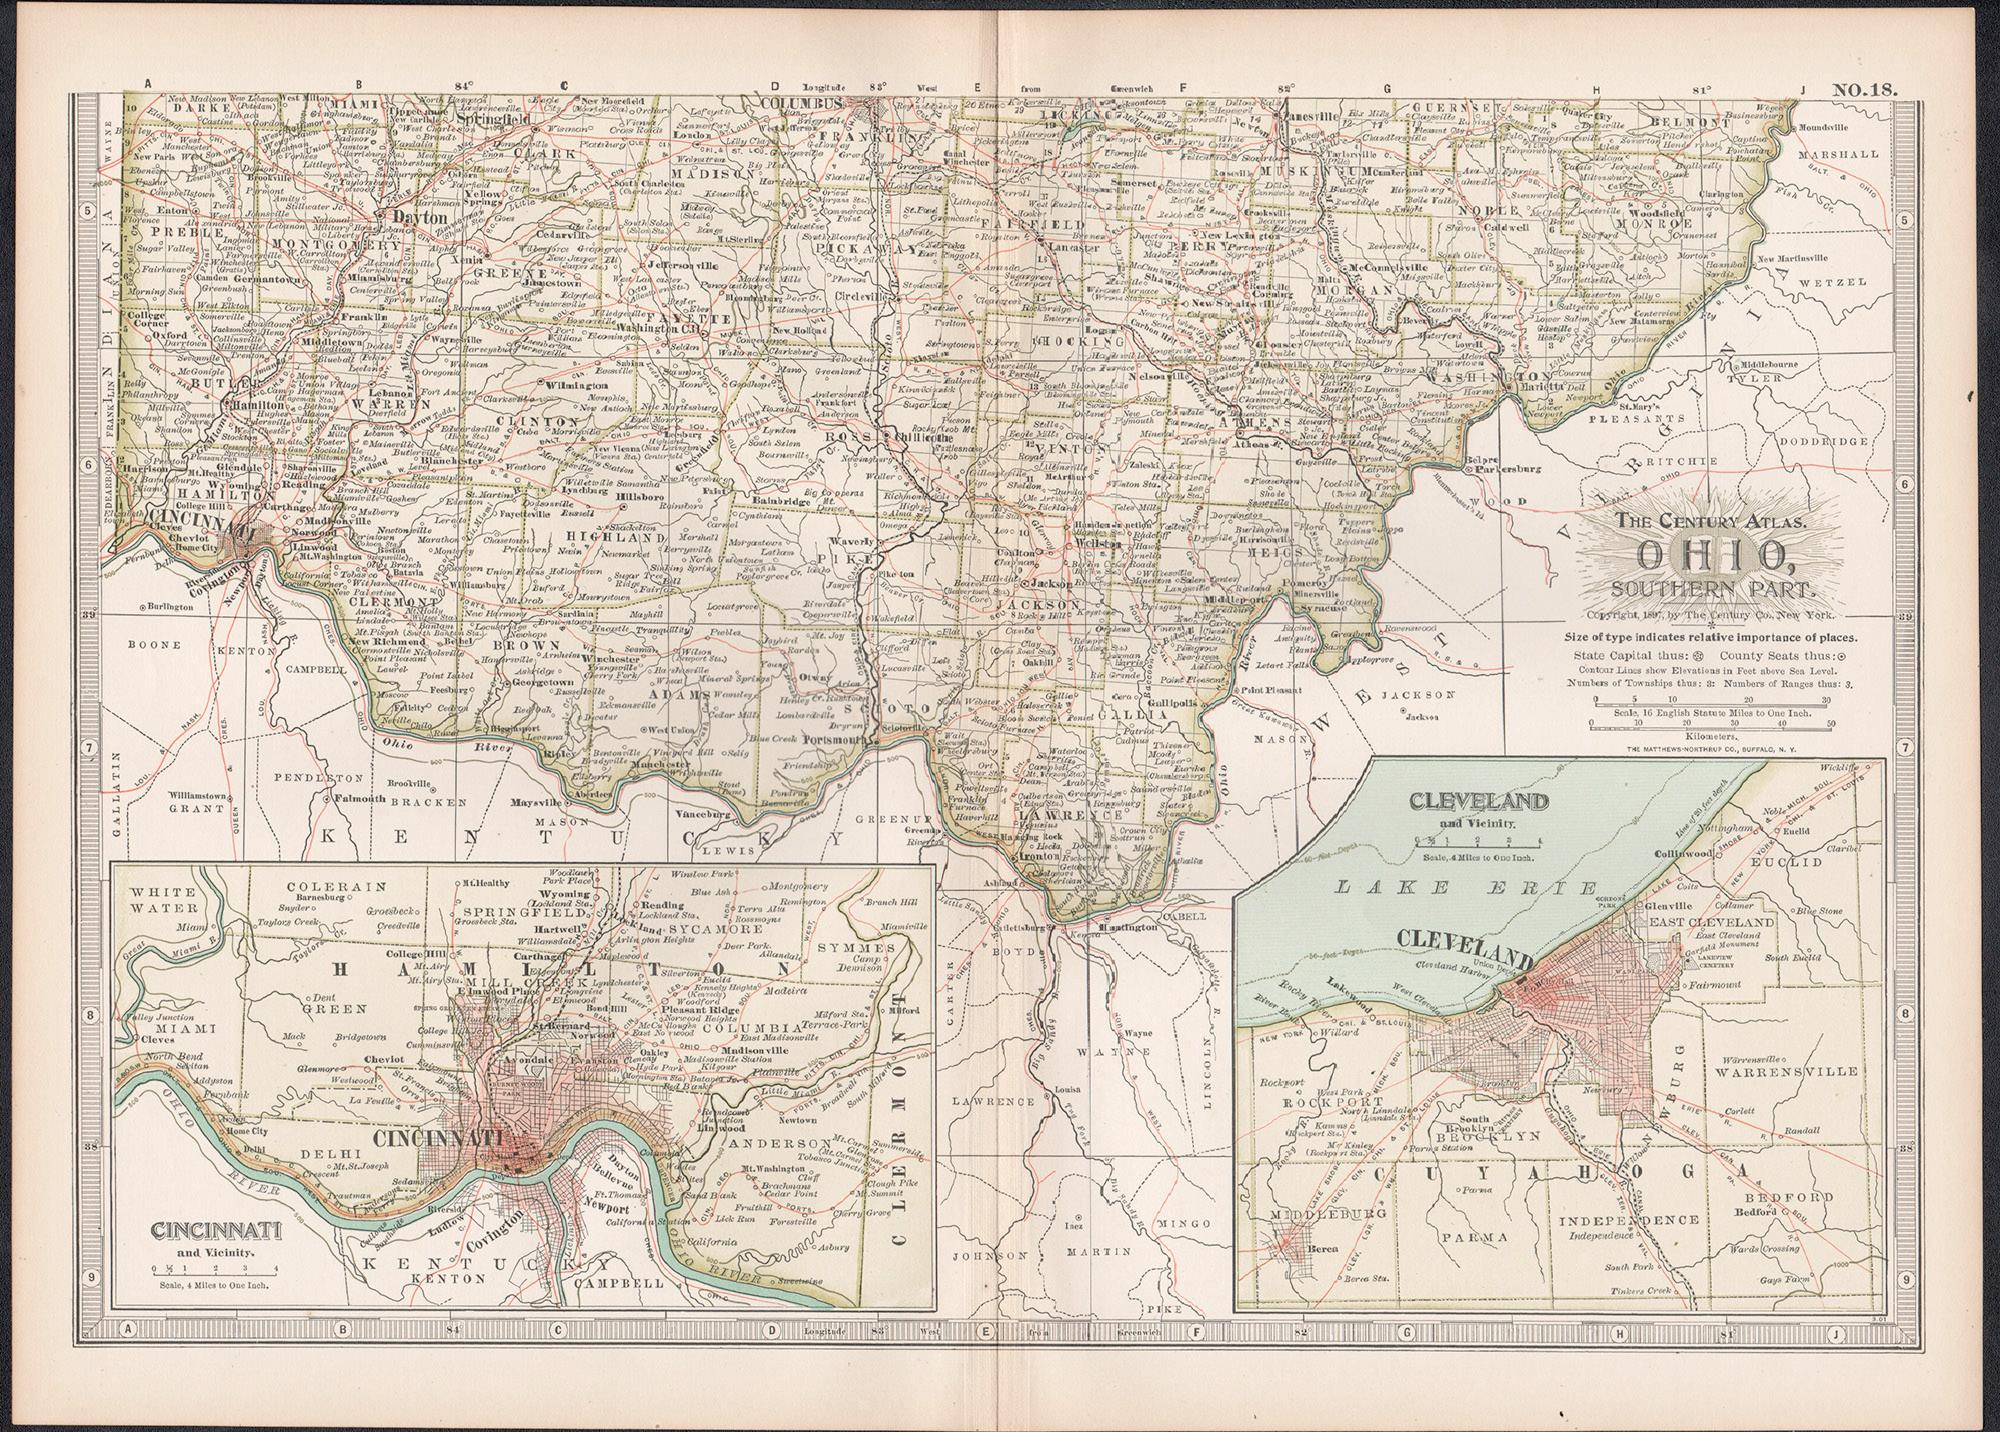 Ohio, Southern Part. USA. Century Atlas state antique vintage map - Print by Unknown